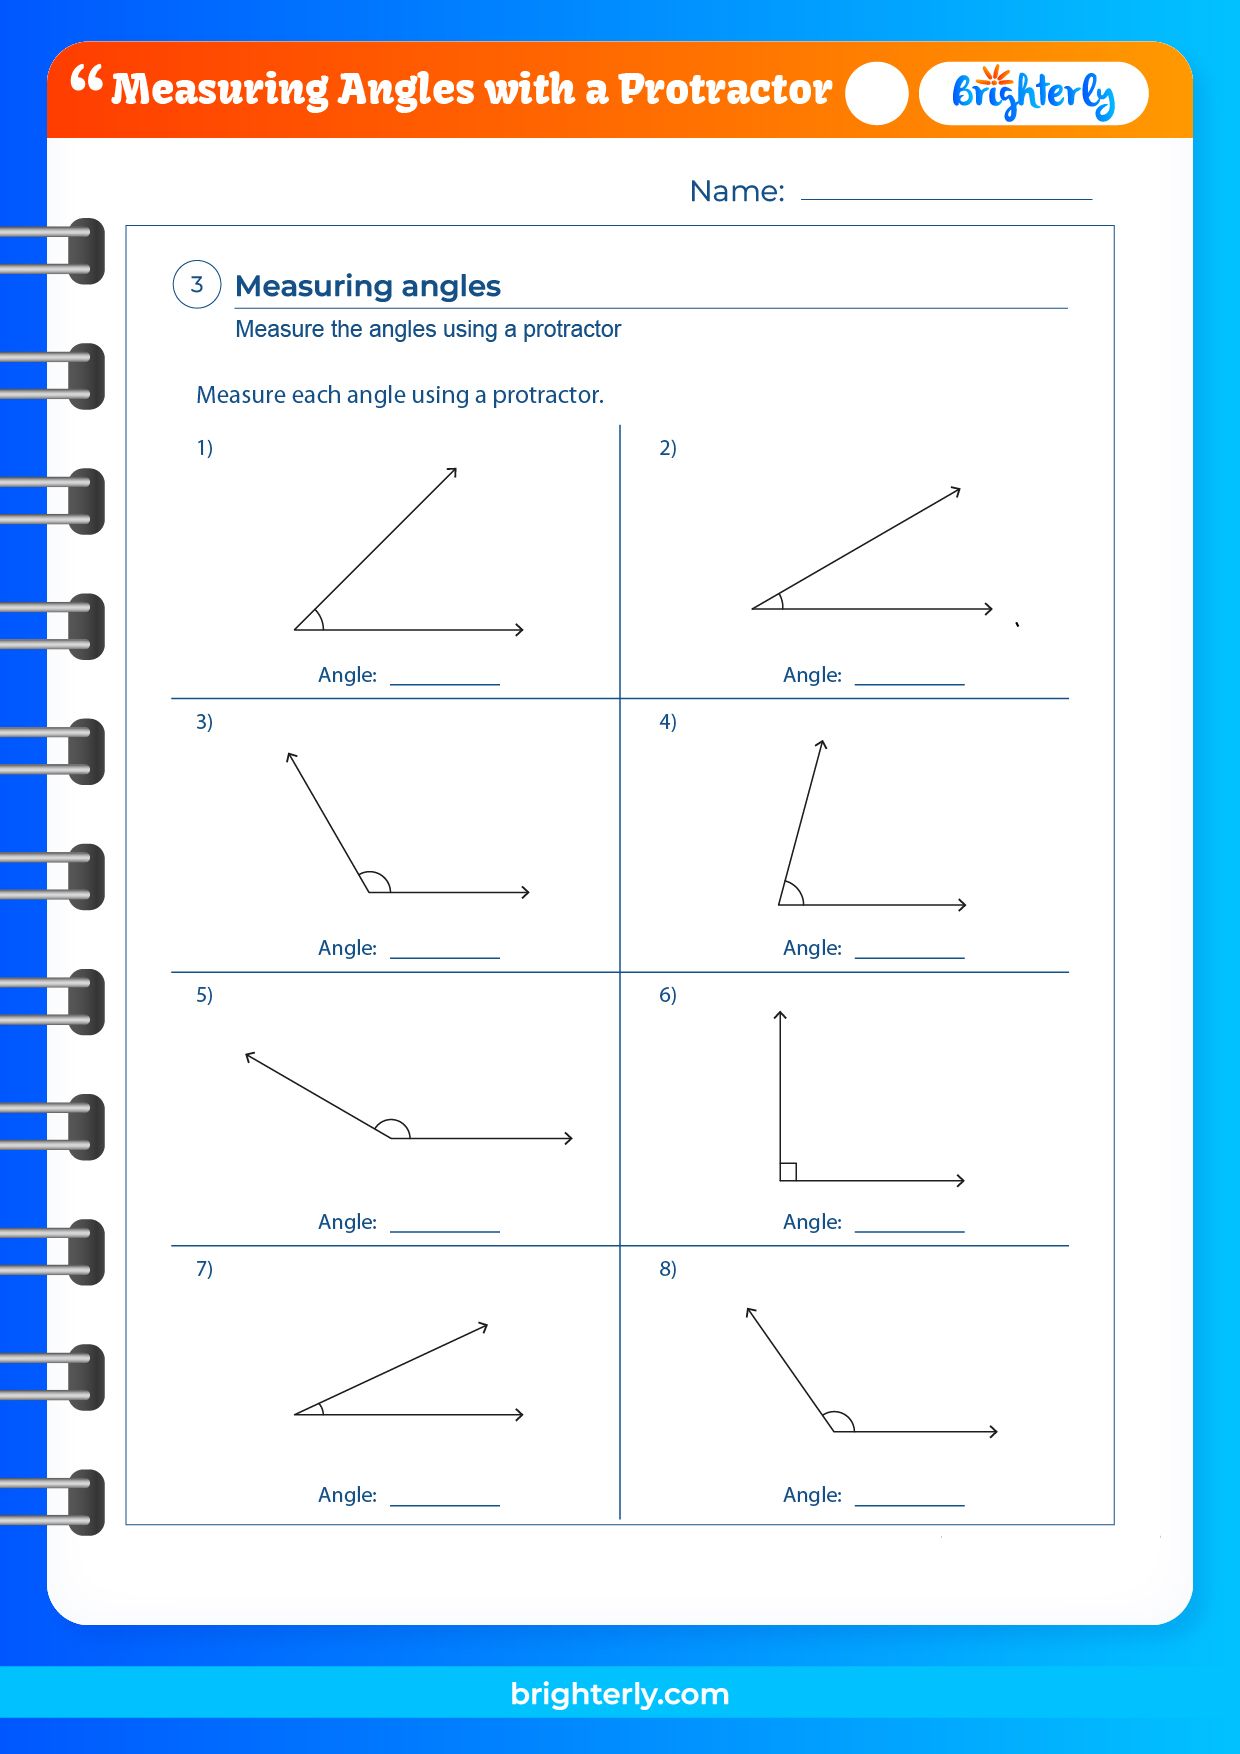 measuring angles with a protractor worksheets